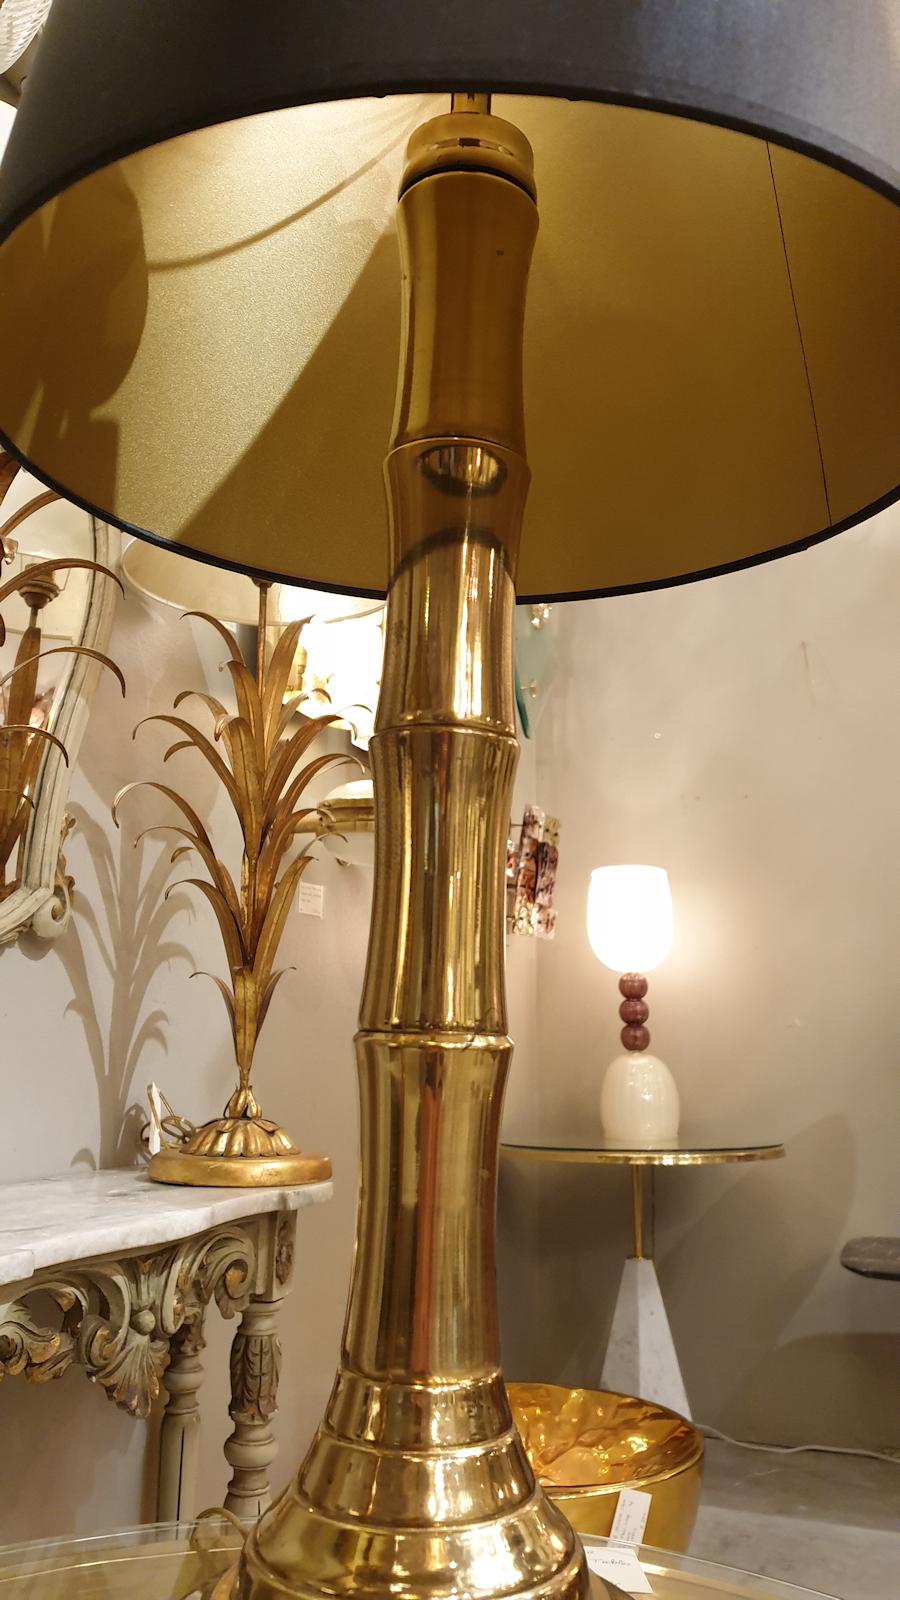 Mid-20th Century Set of Table & Floor Brass Faux-Bamboo Lamps, Mid-Century Modern, France 1960s